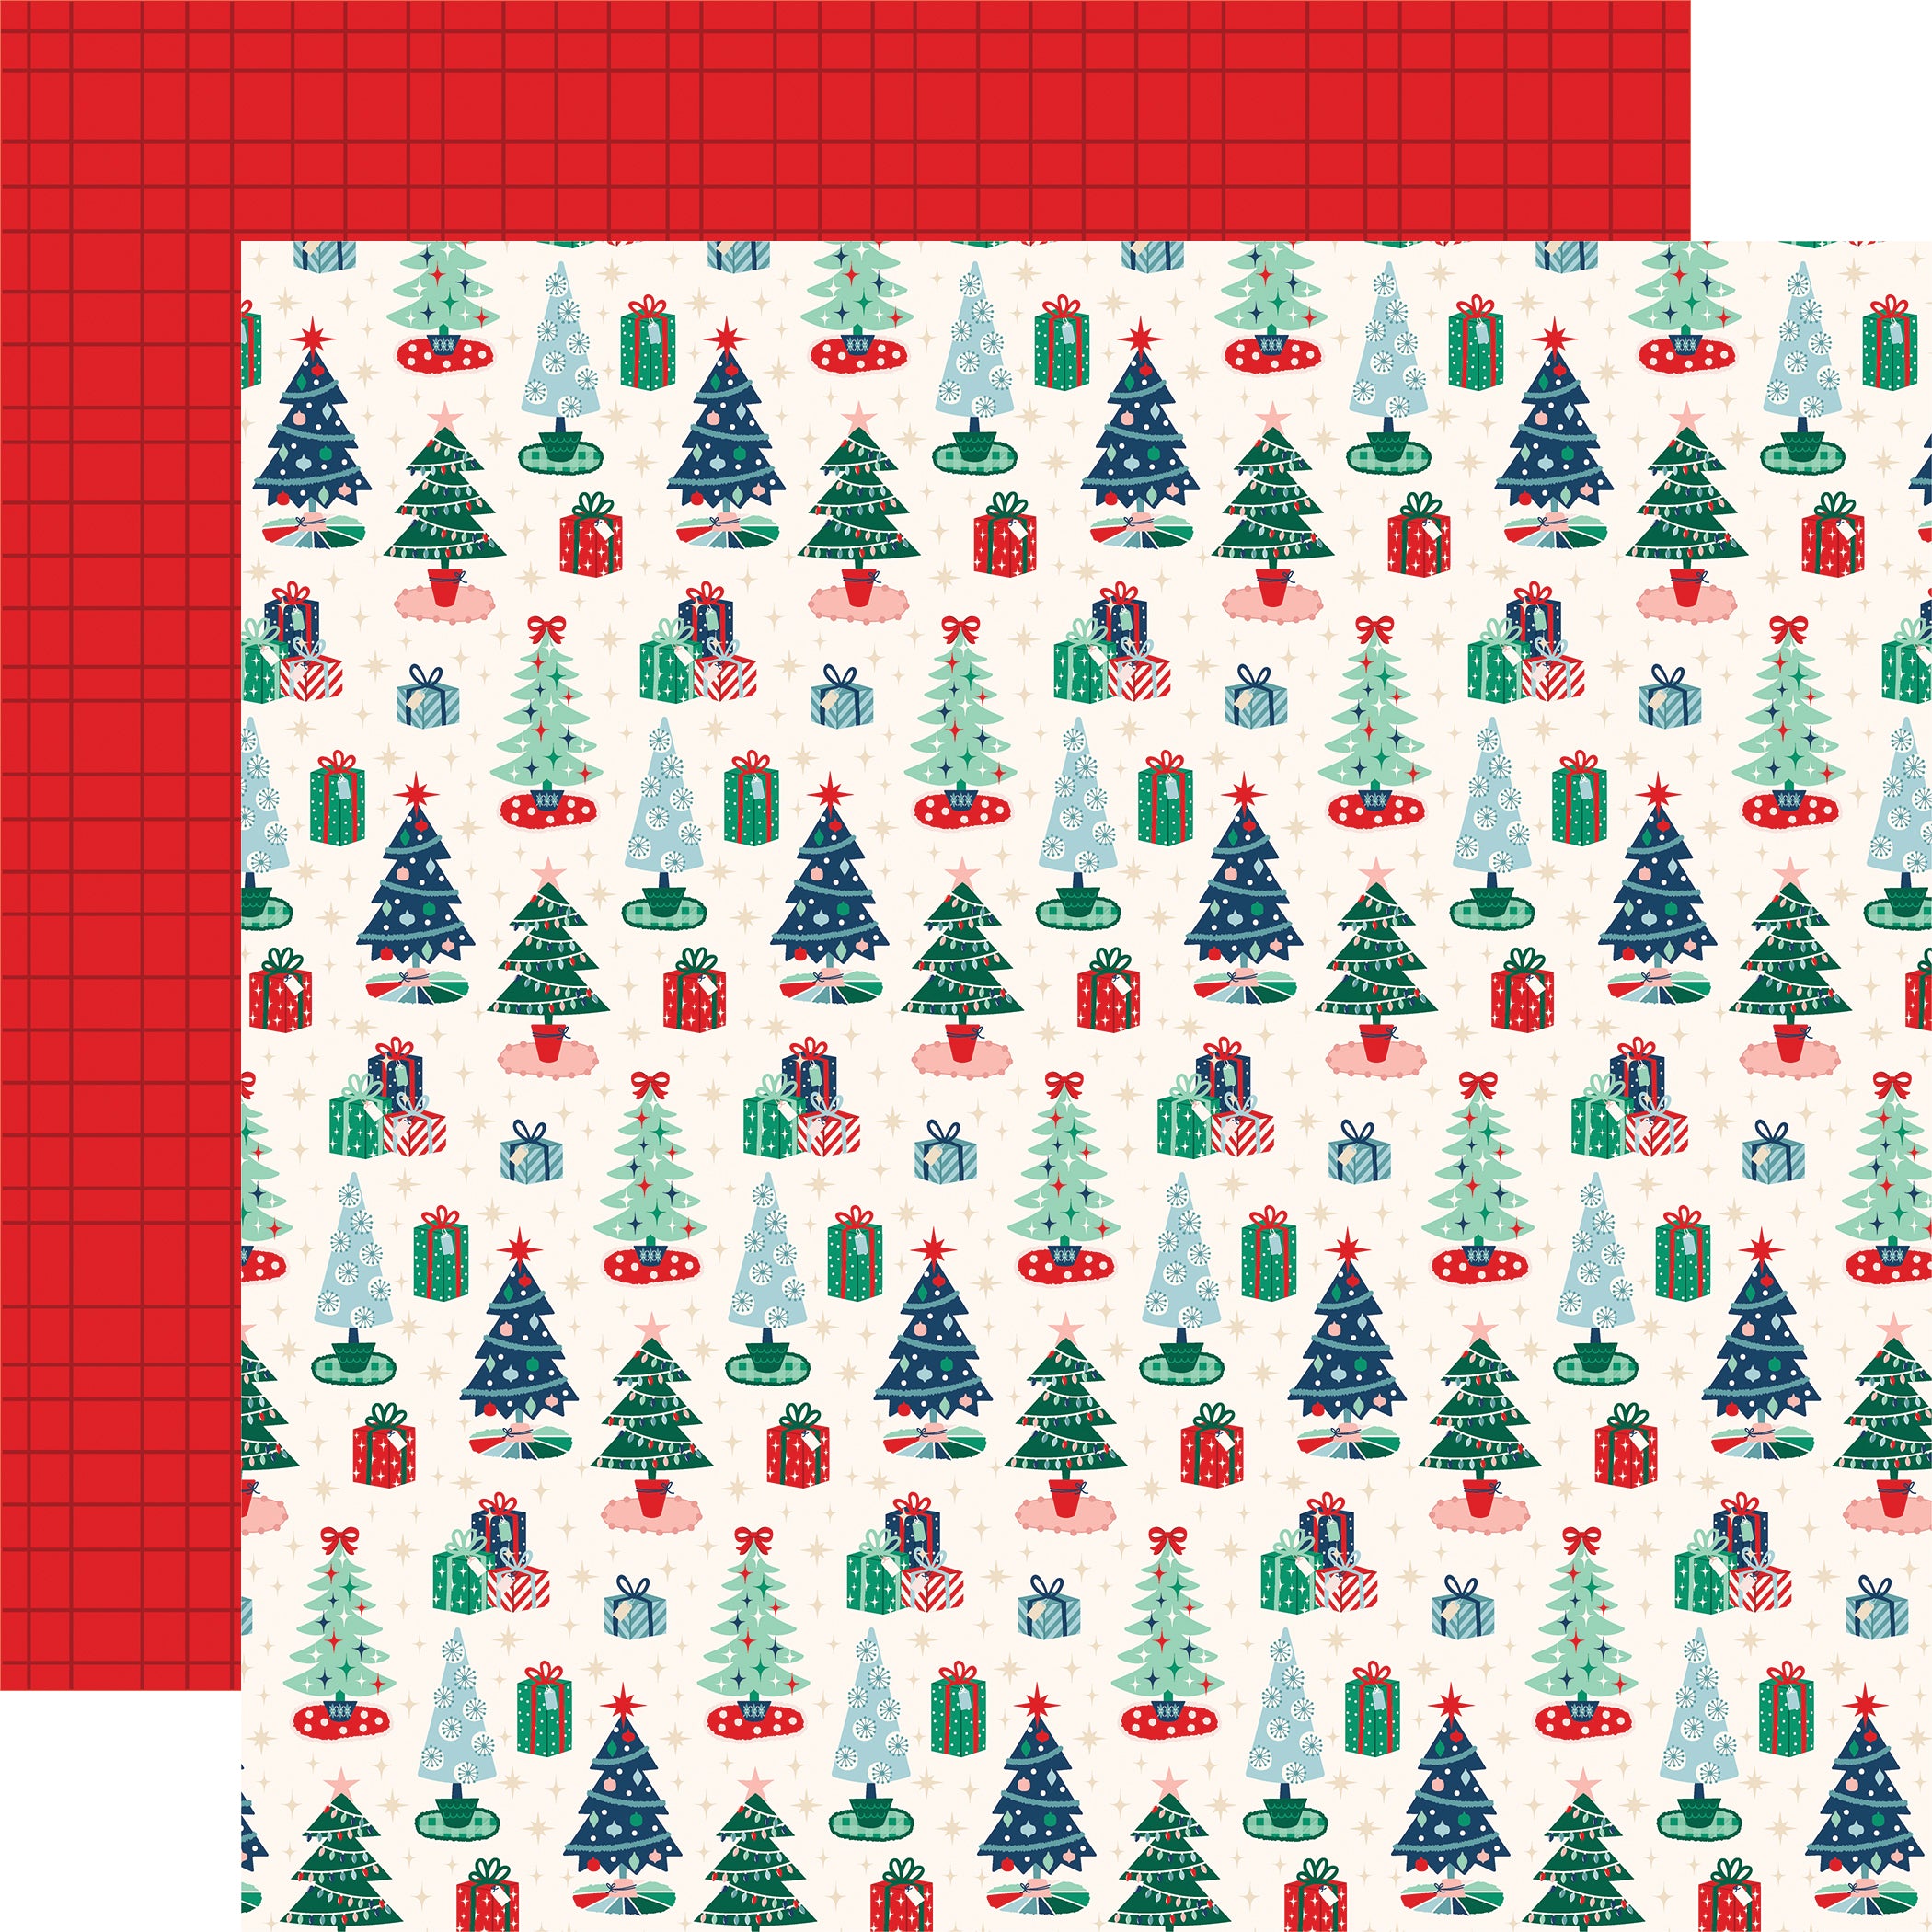 Happy Holidays Collection Under The Tree 12 x 12 Double-Sided Scrapbook Paper by Carta Bella